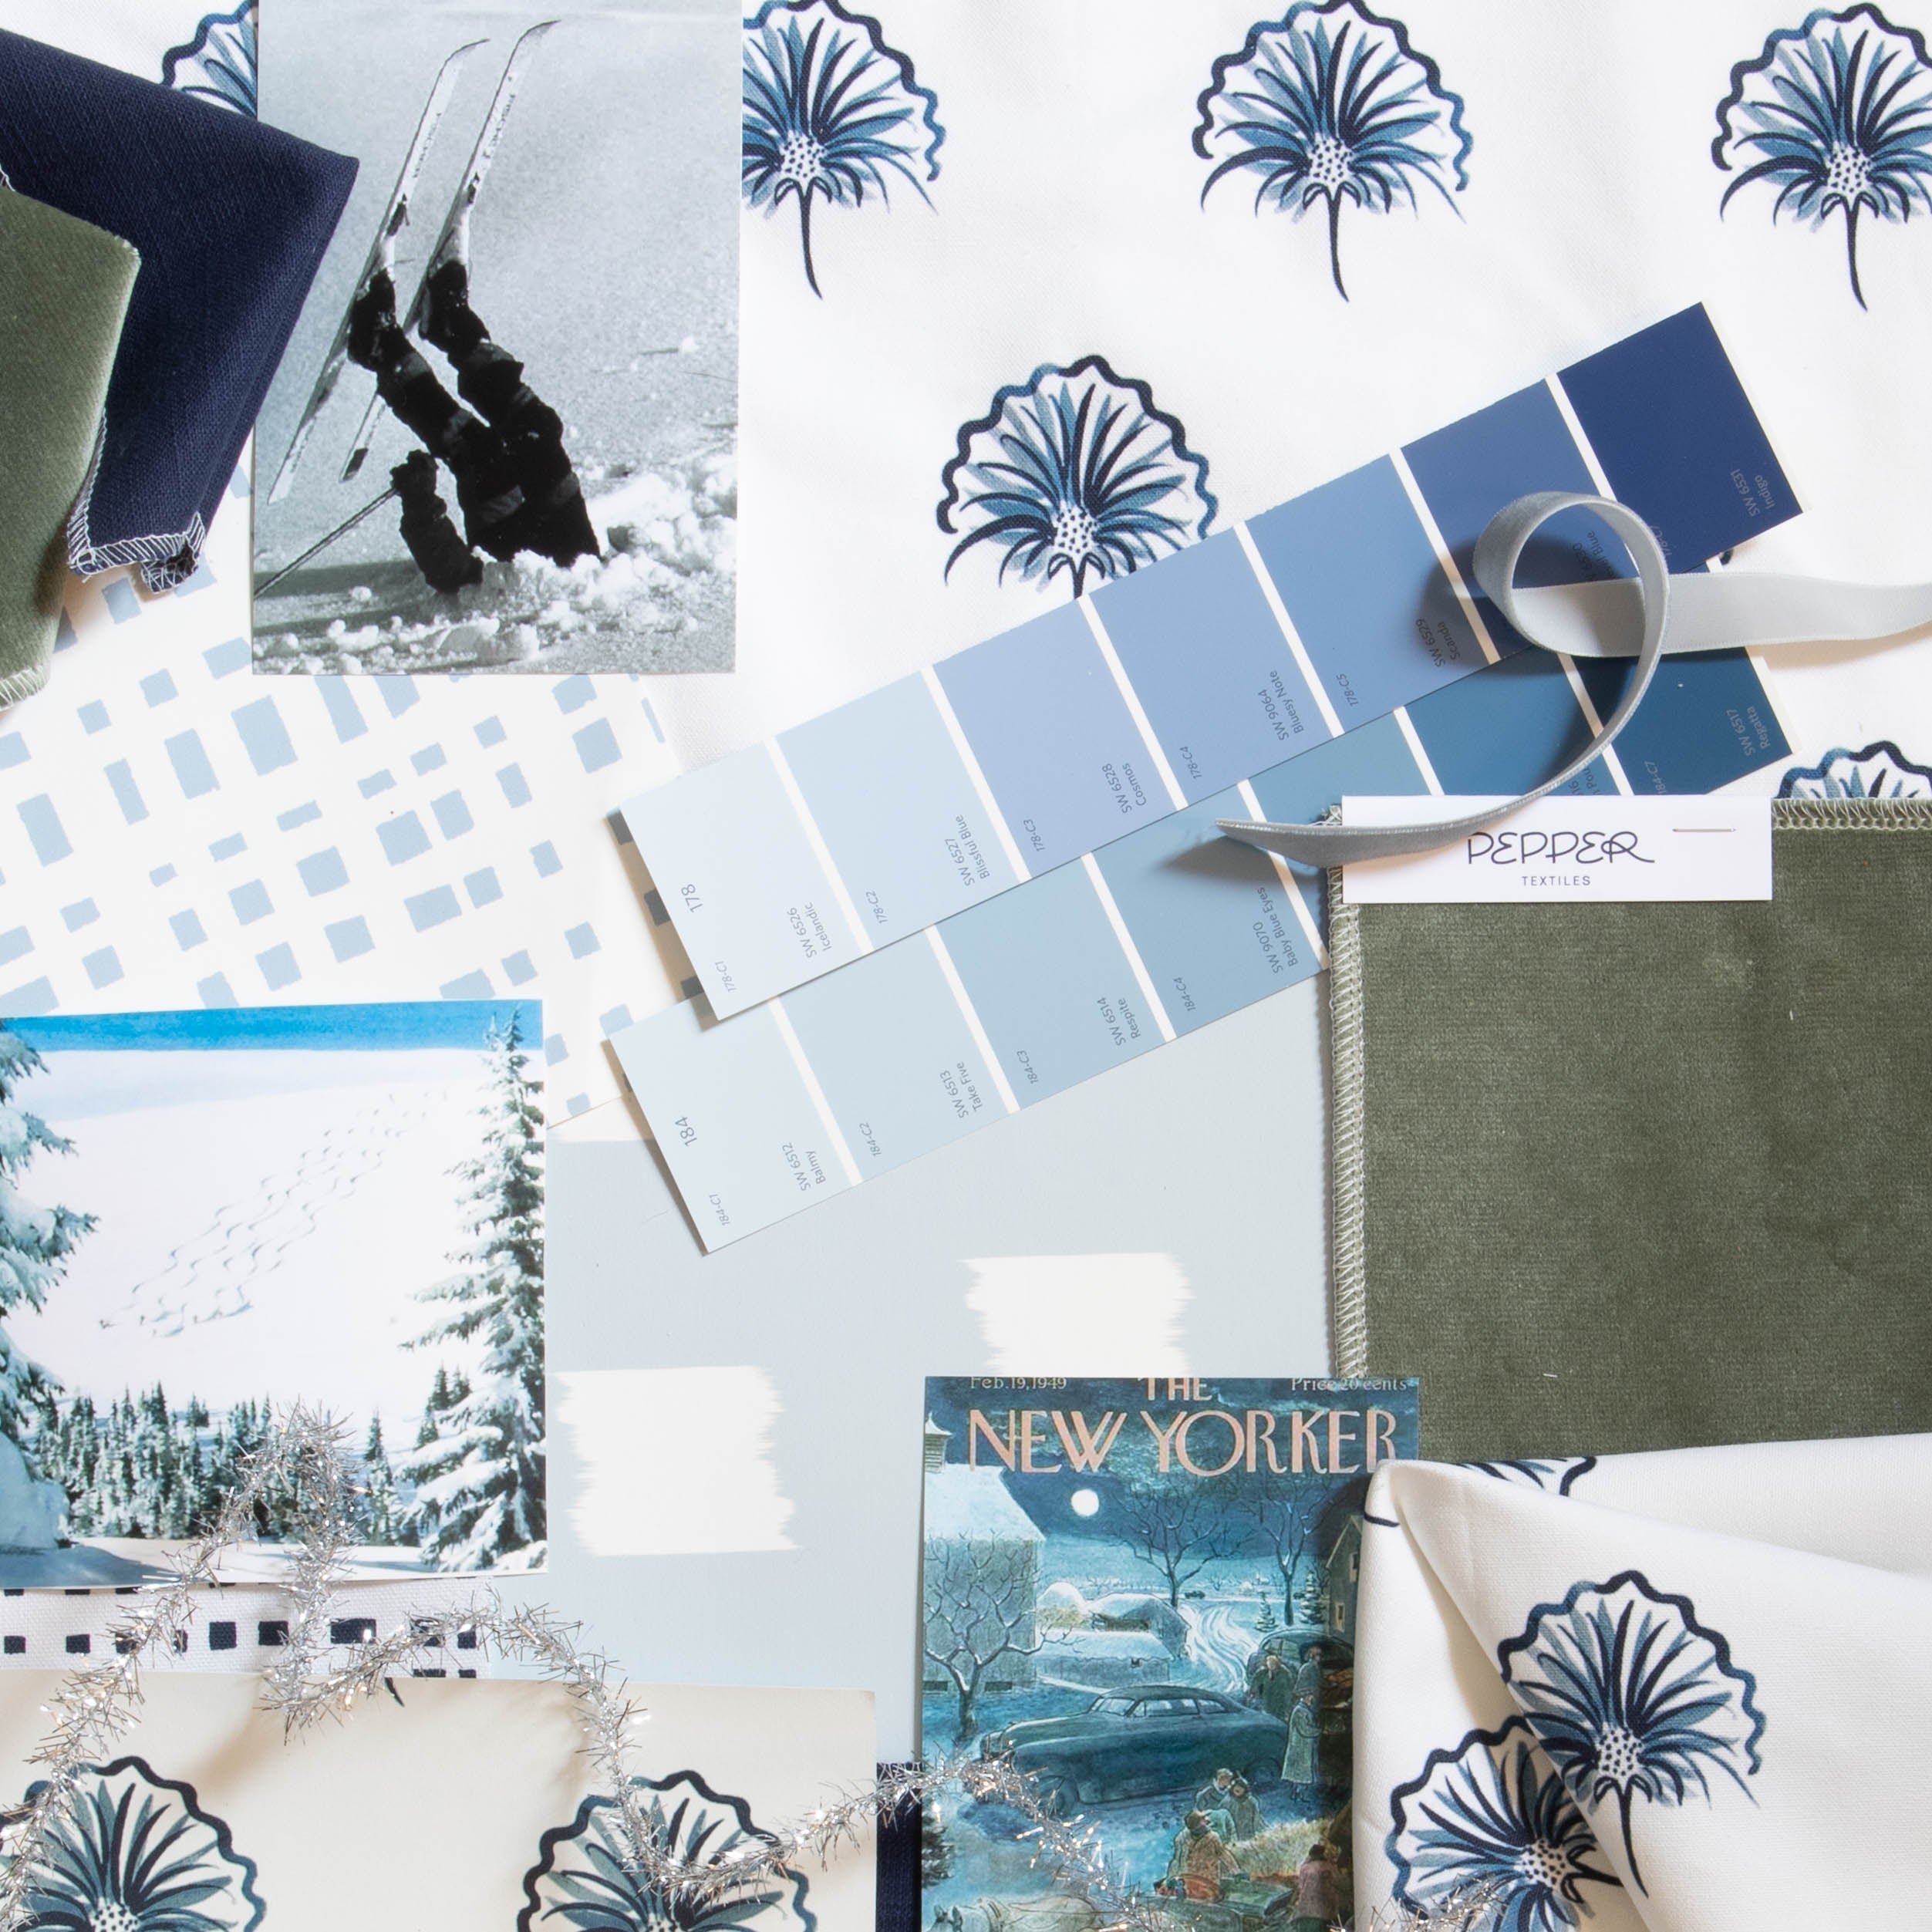 Interior design moodboard and fabric inspirations with Sky Blue Gingham Printed Swatch, Floral Navy Printed Swatch, and Fern Velvet Swatch